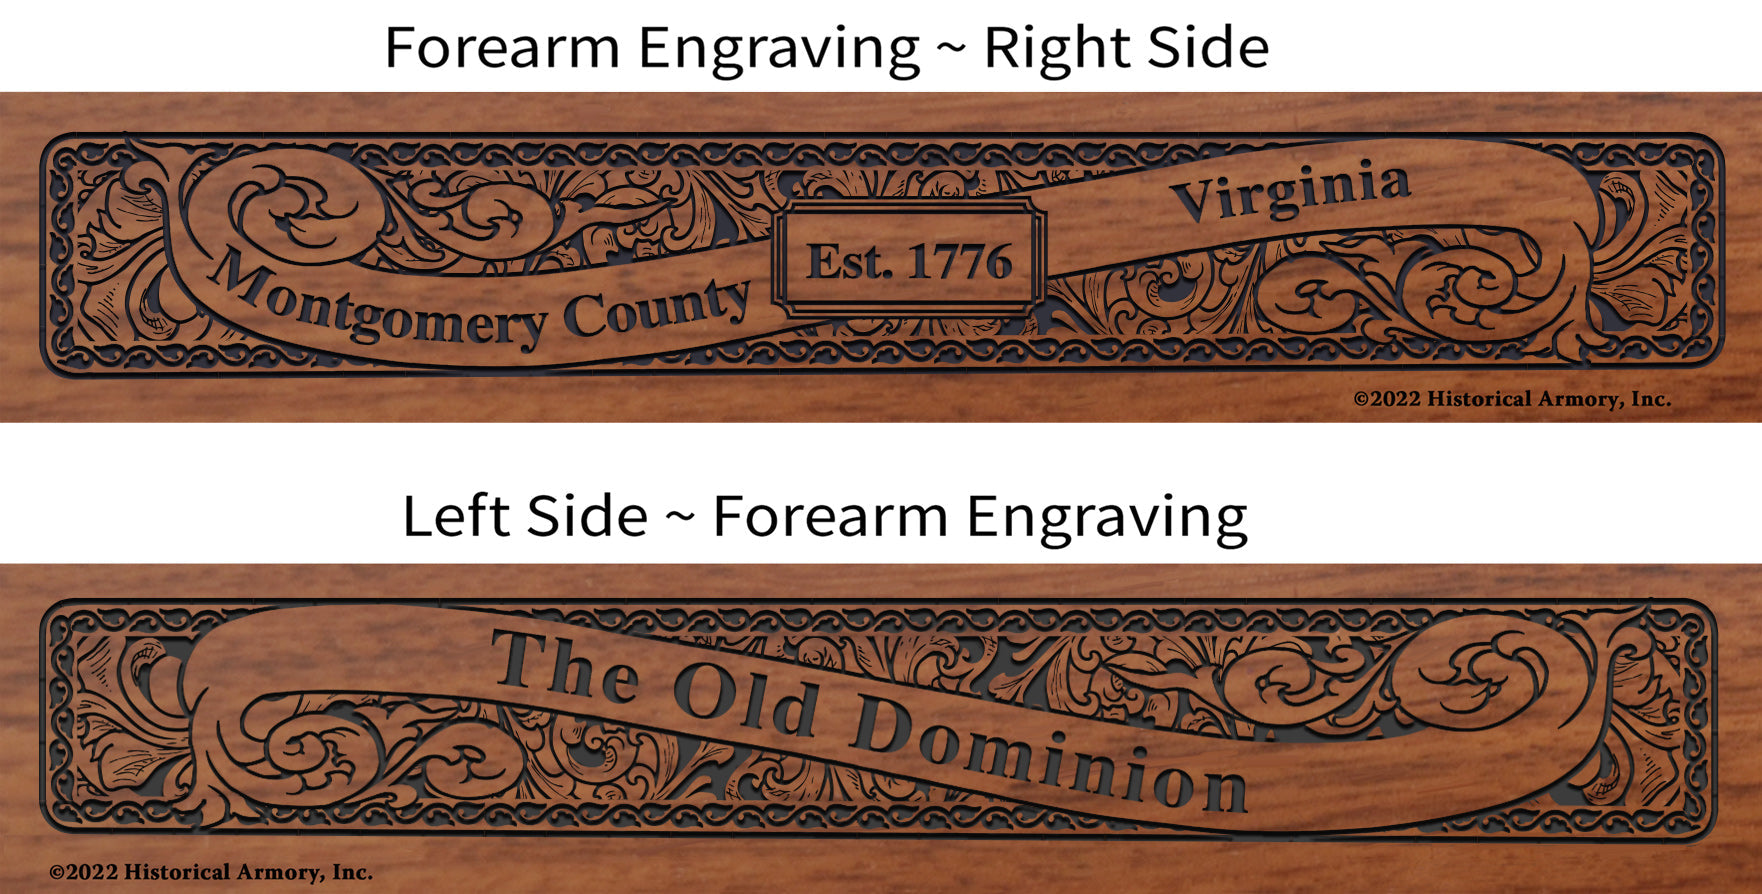 Montgomery County Virginia Engraved Rifle Forearm